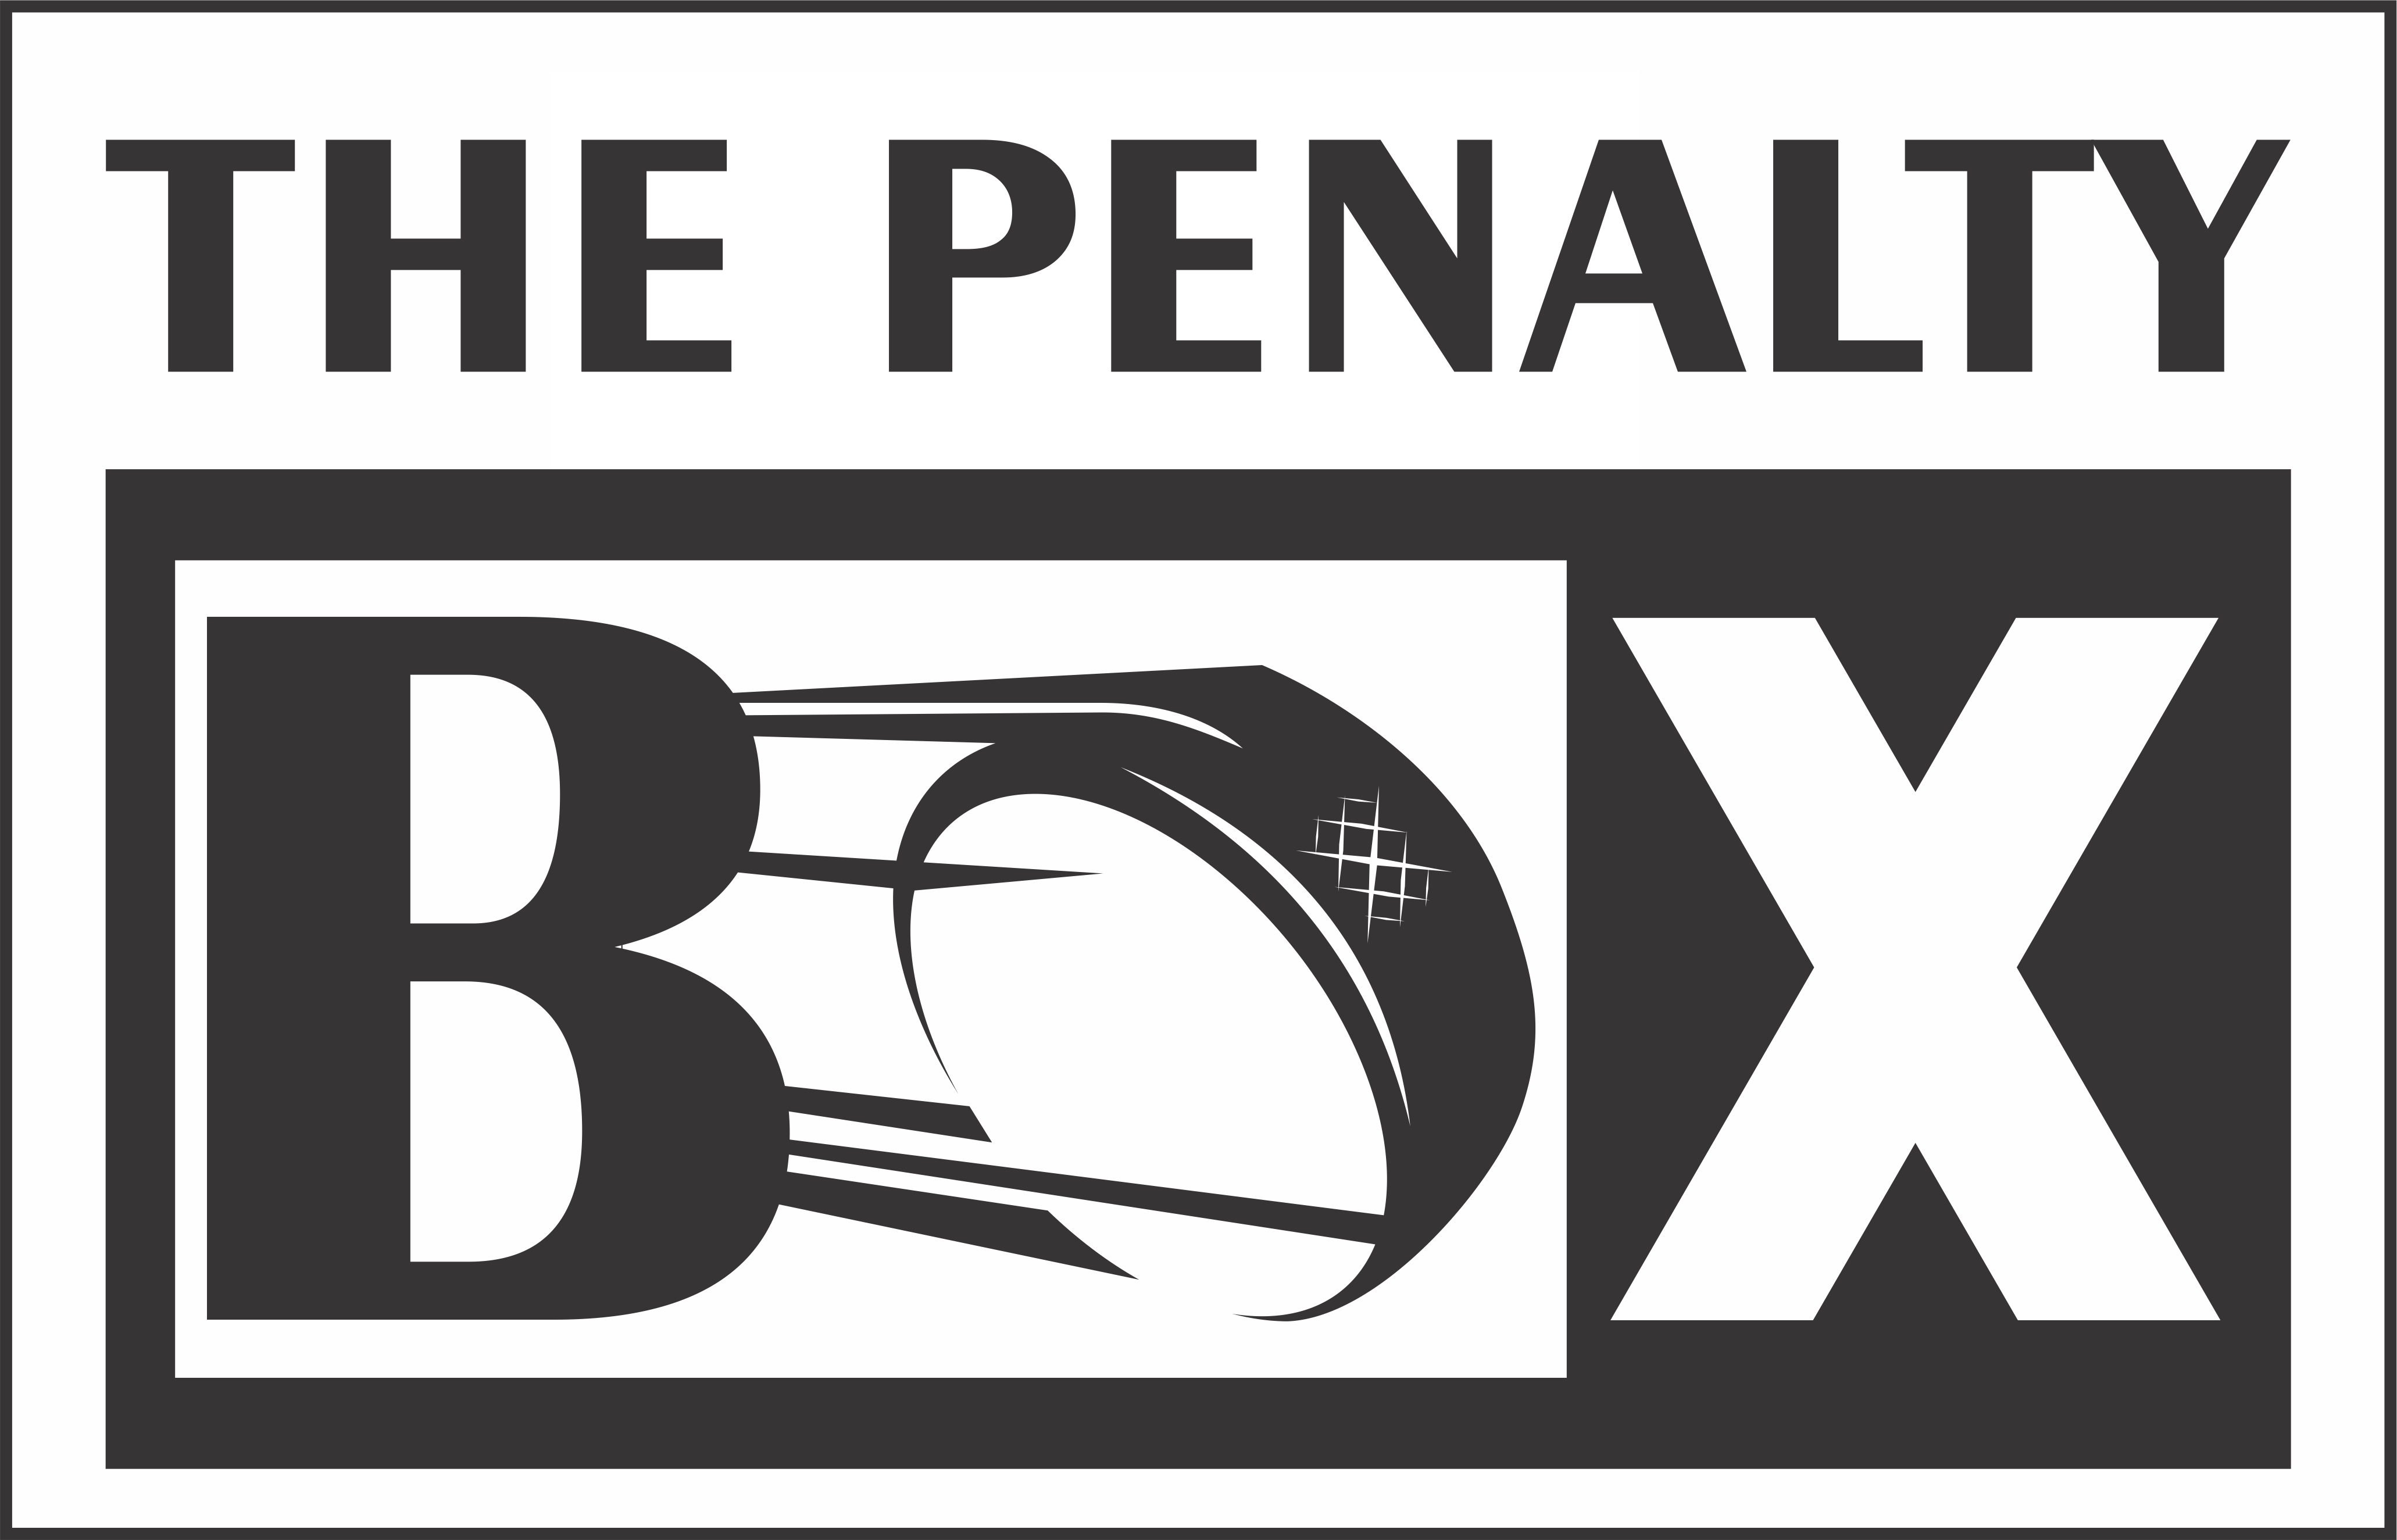 THE PENALTY BOX